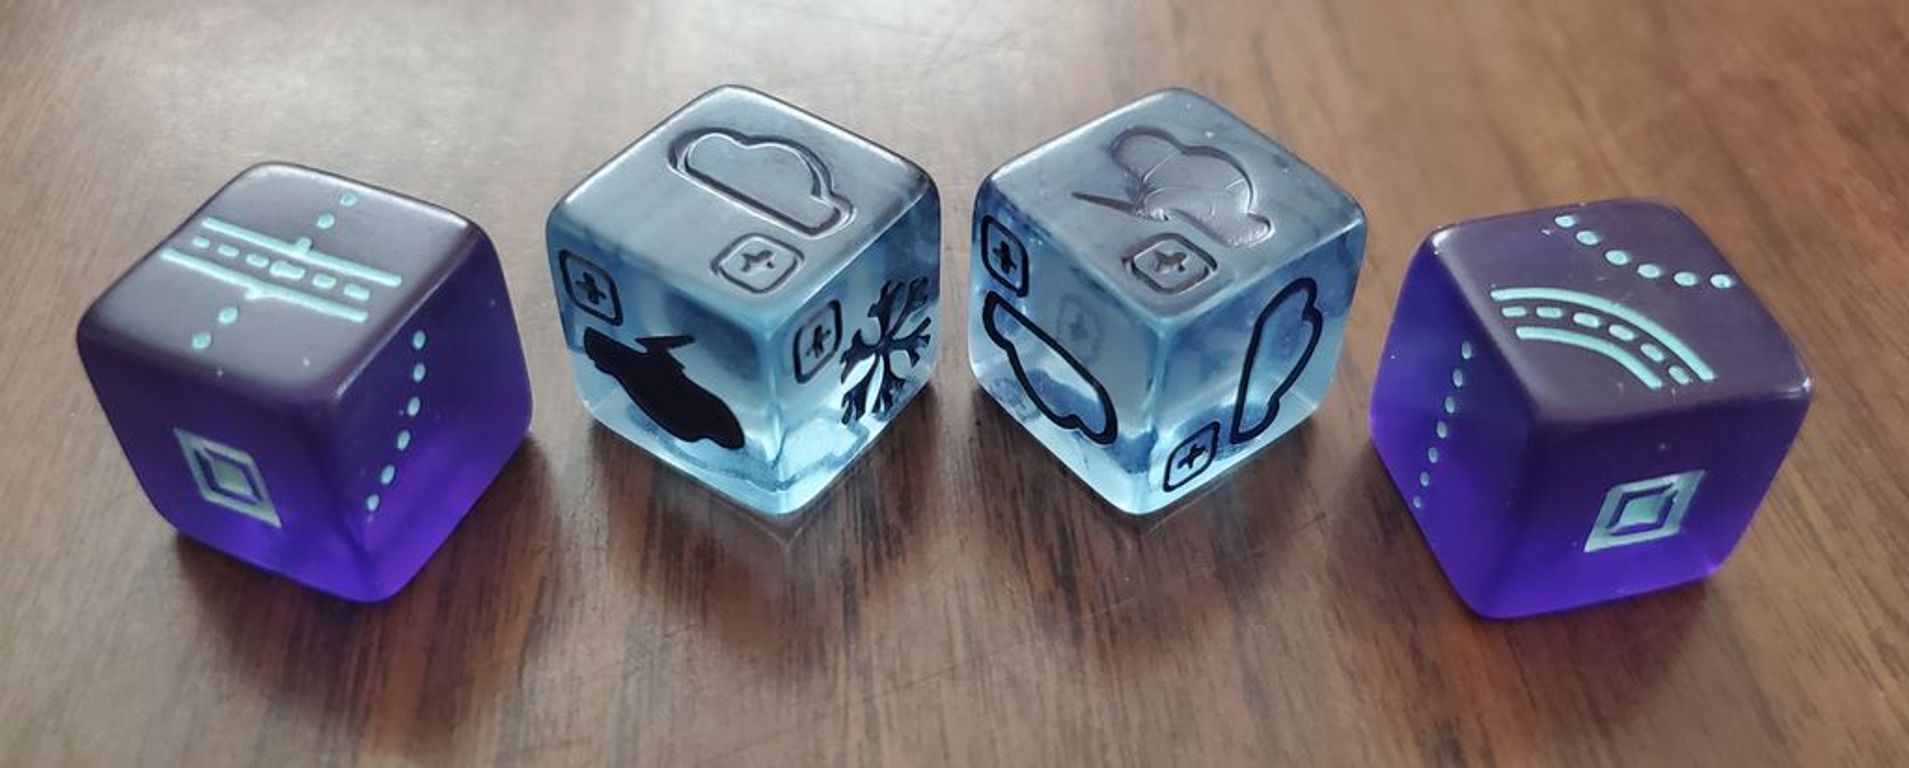 Railroad Ink: Sky Expansion Pack dice